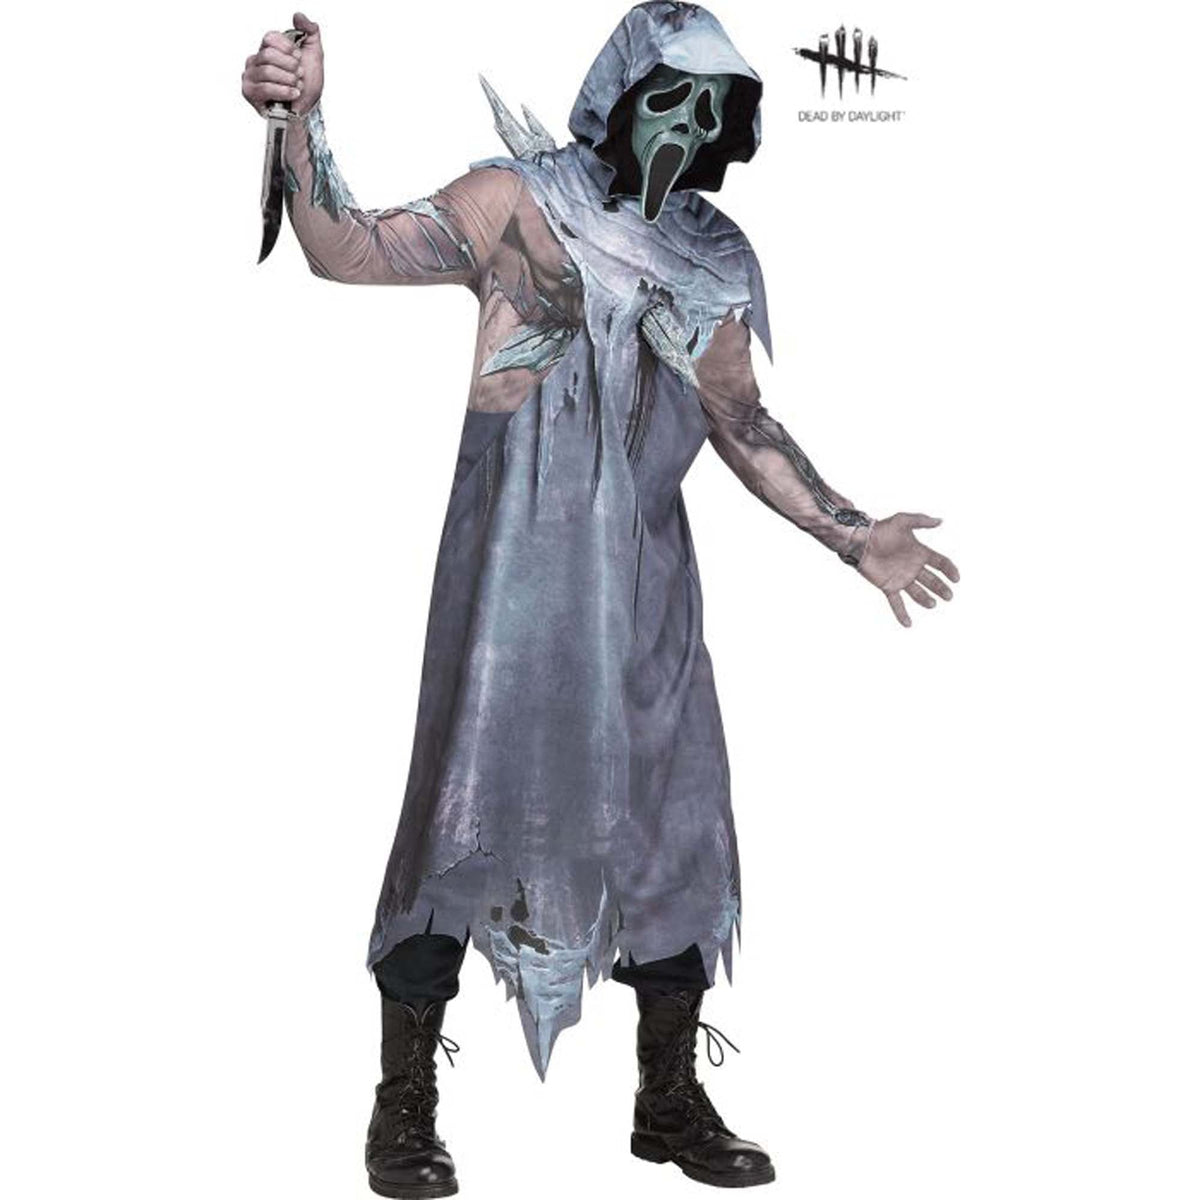 FUN WORLD Costumes Dead by Daylight Icebound Phantom Costume for Adults 071765139205